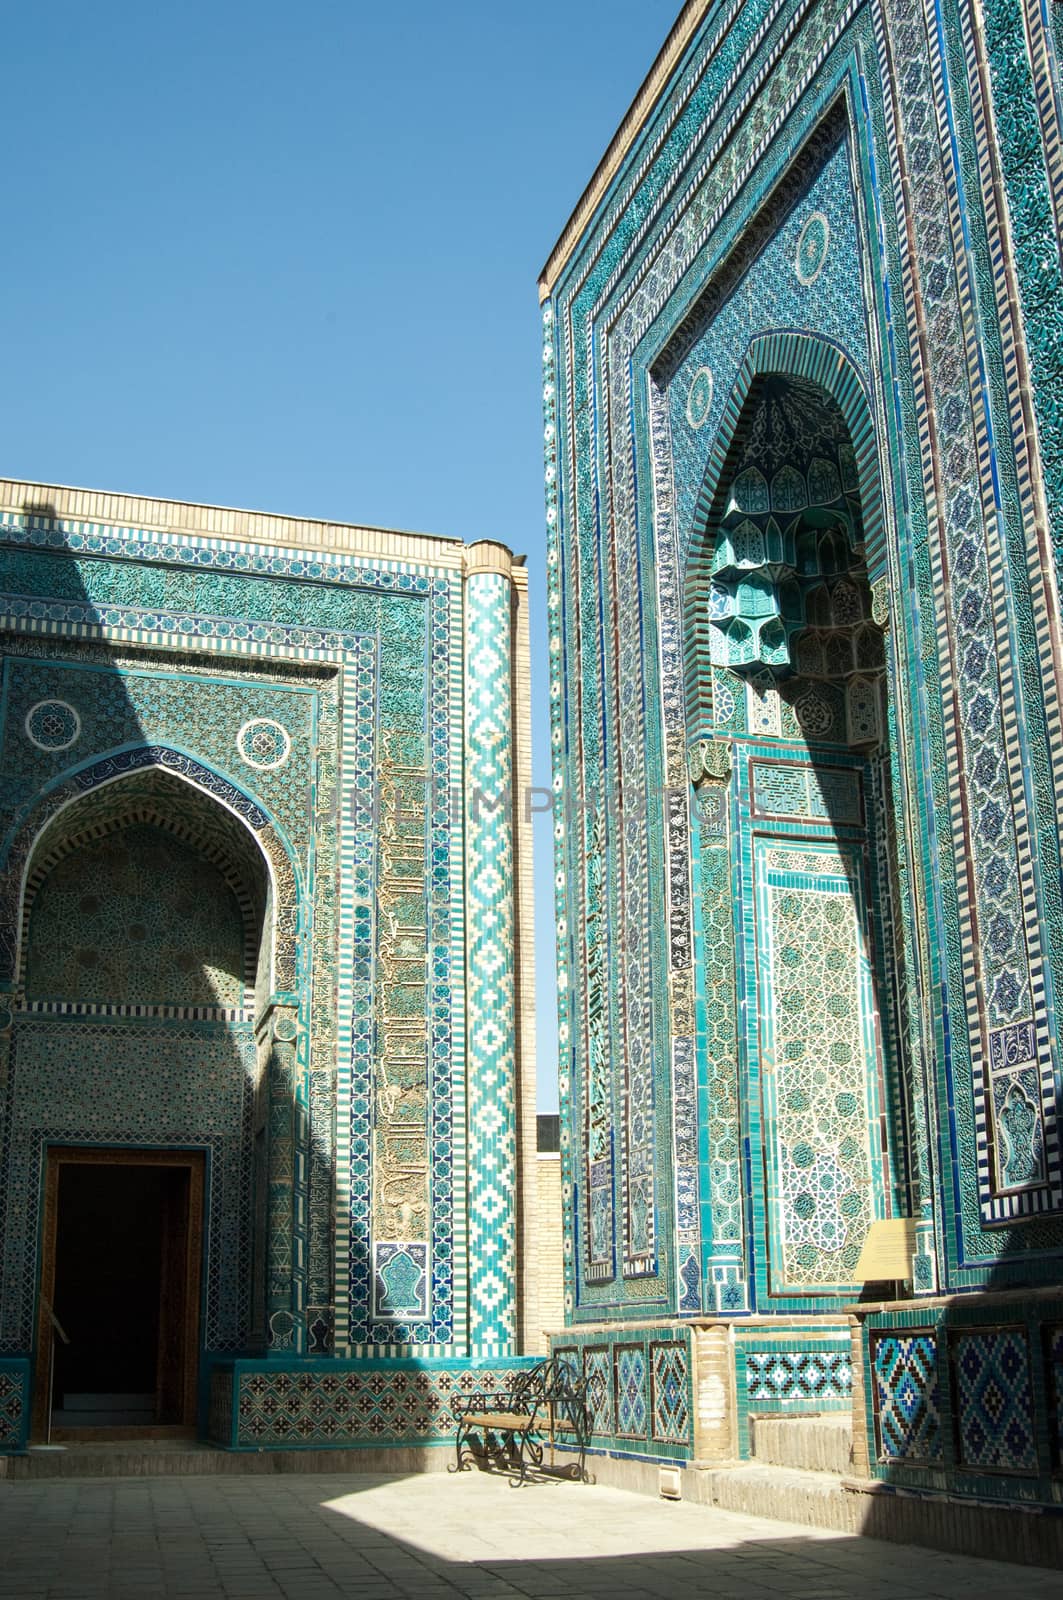 The arch and the exterior design of the ancient Registan in Samarkand. Ancient architecture of Central Asia